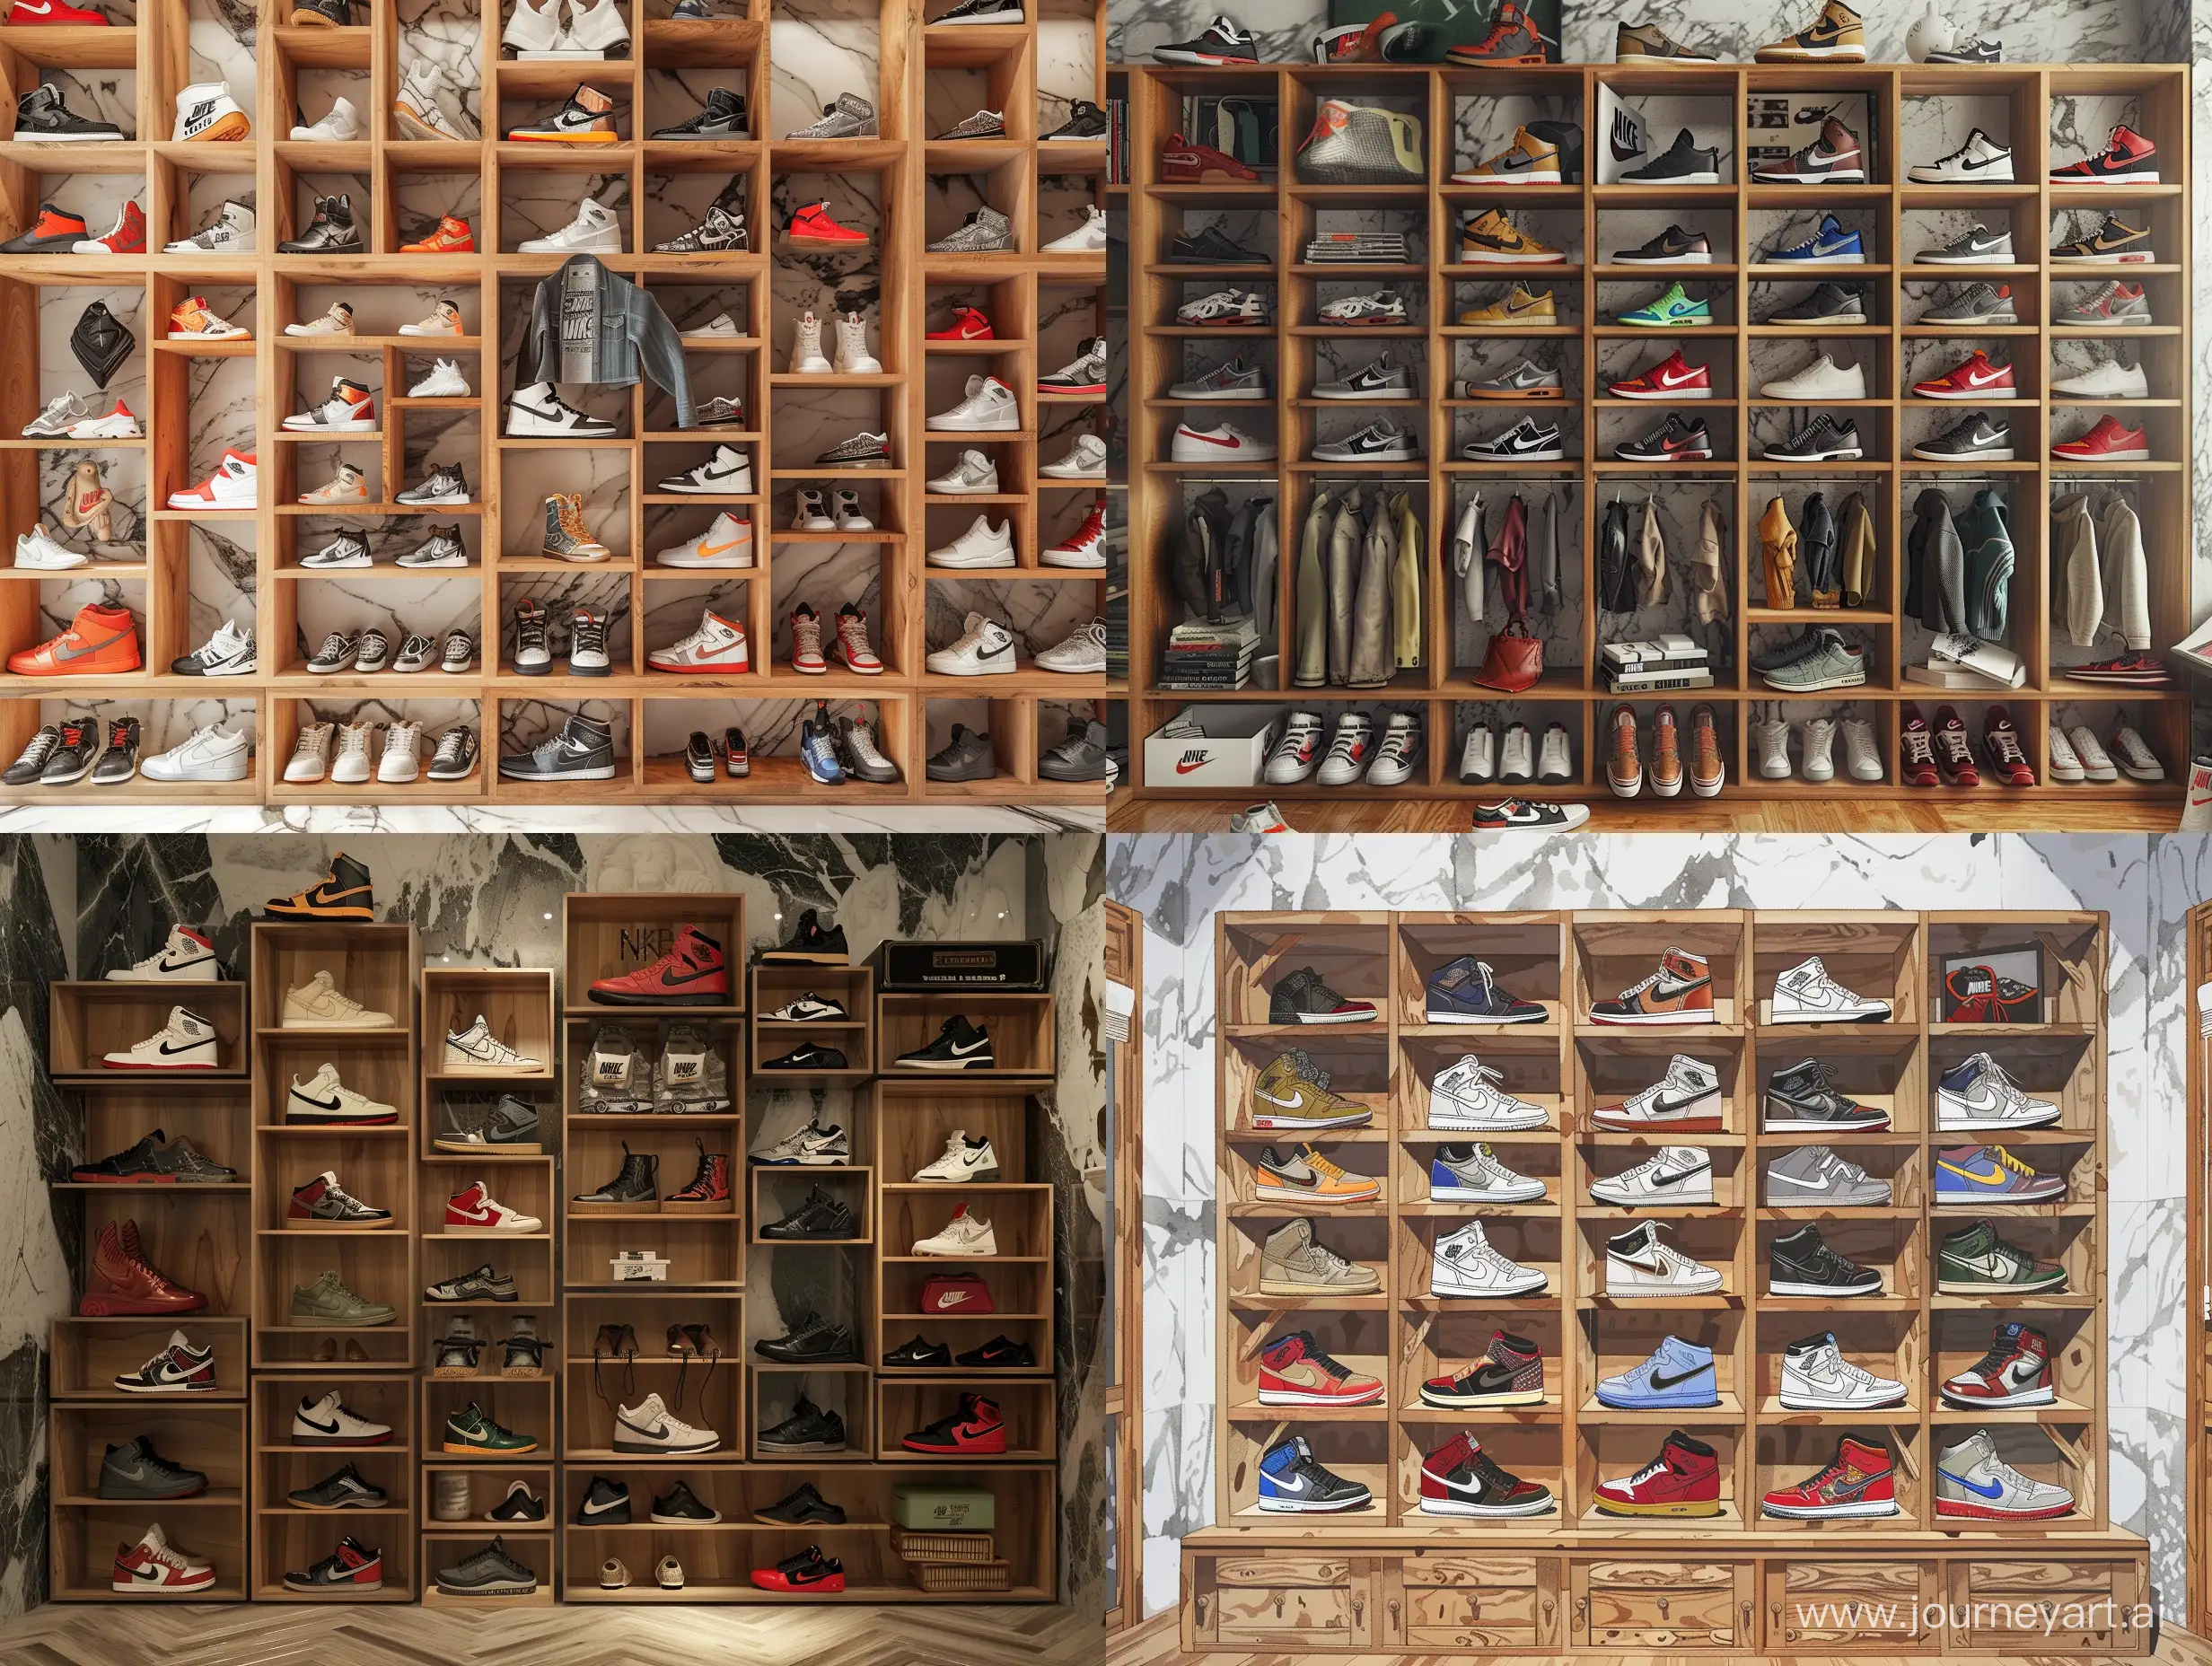 Urban-Japanese-Streetwear-Collection-Displayed-in-Cozy-Room-with-Nike-Sneakers-on-Wooden-Shelves-by-Adam-Saks